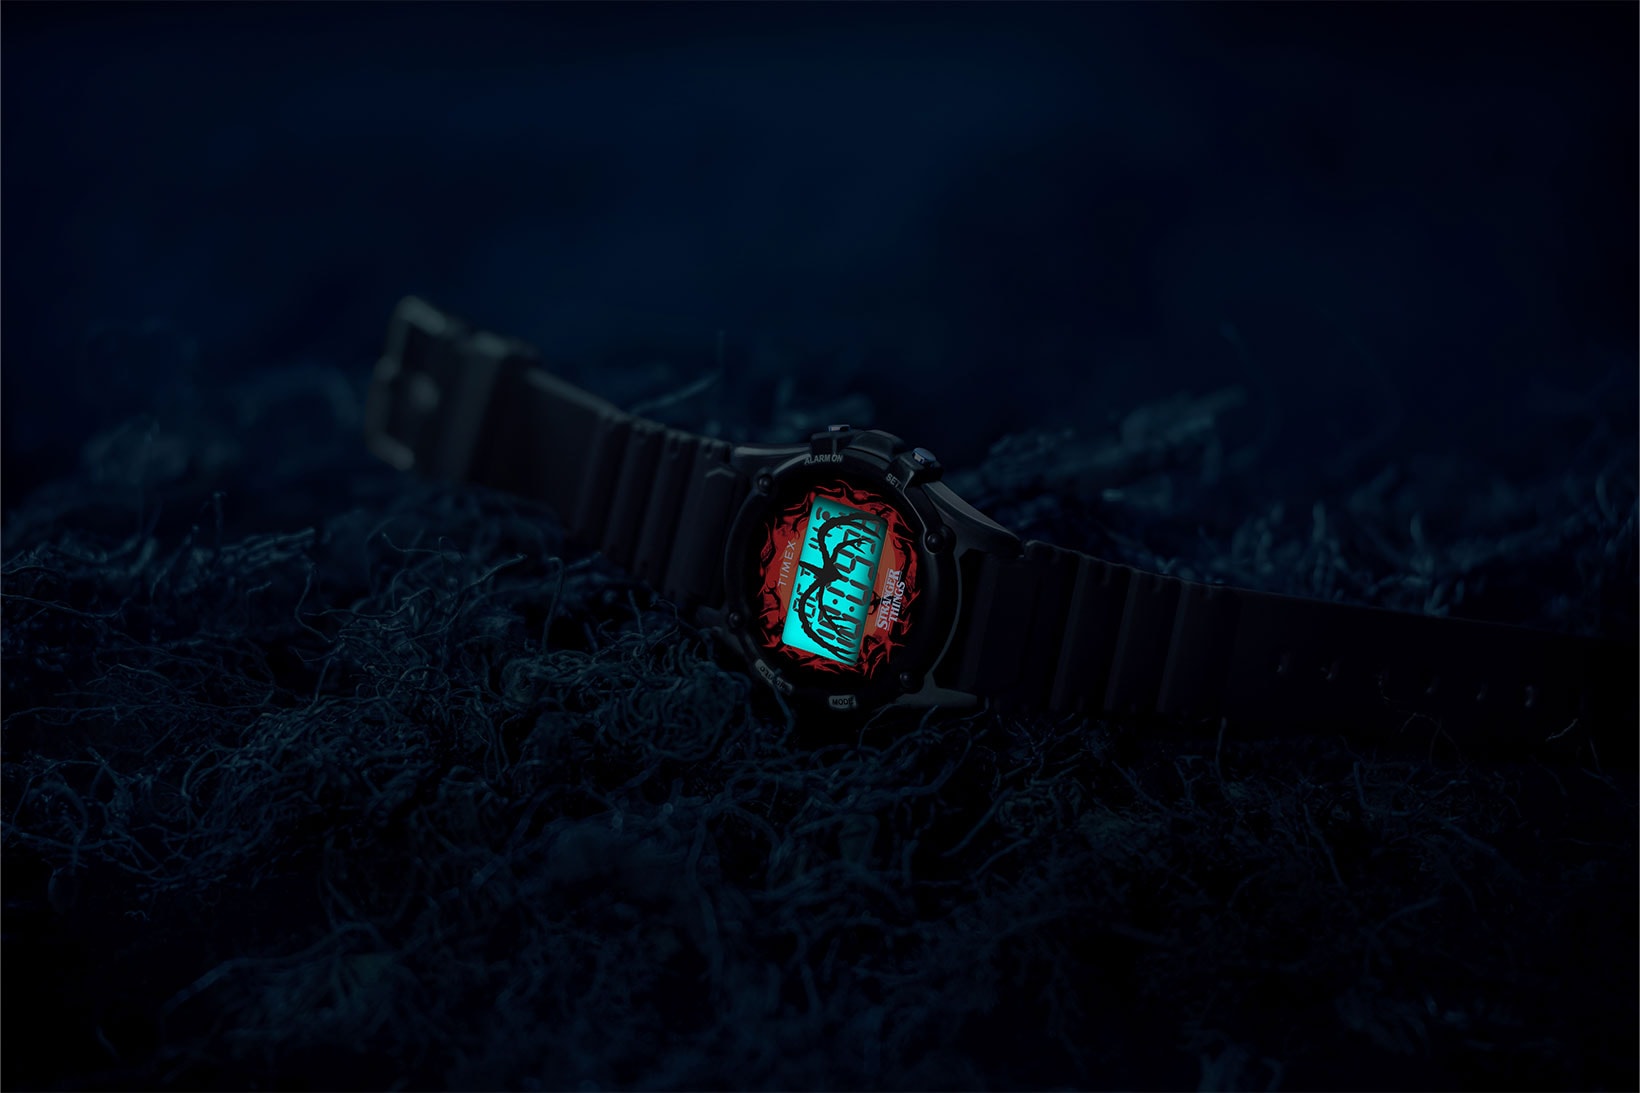 'Stranger Things' Netflix Timex Watches Collaboration T80 Camper Atlantis Release Info